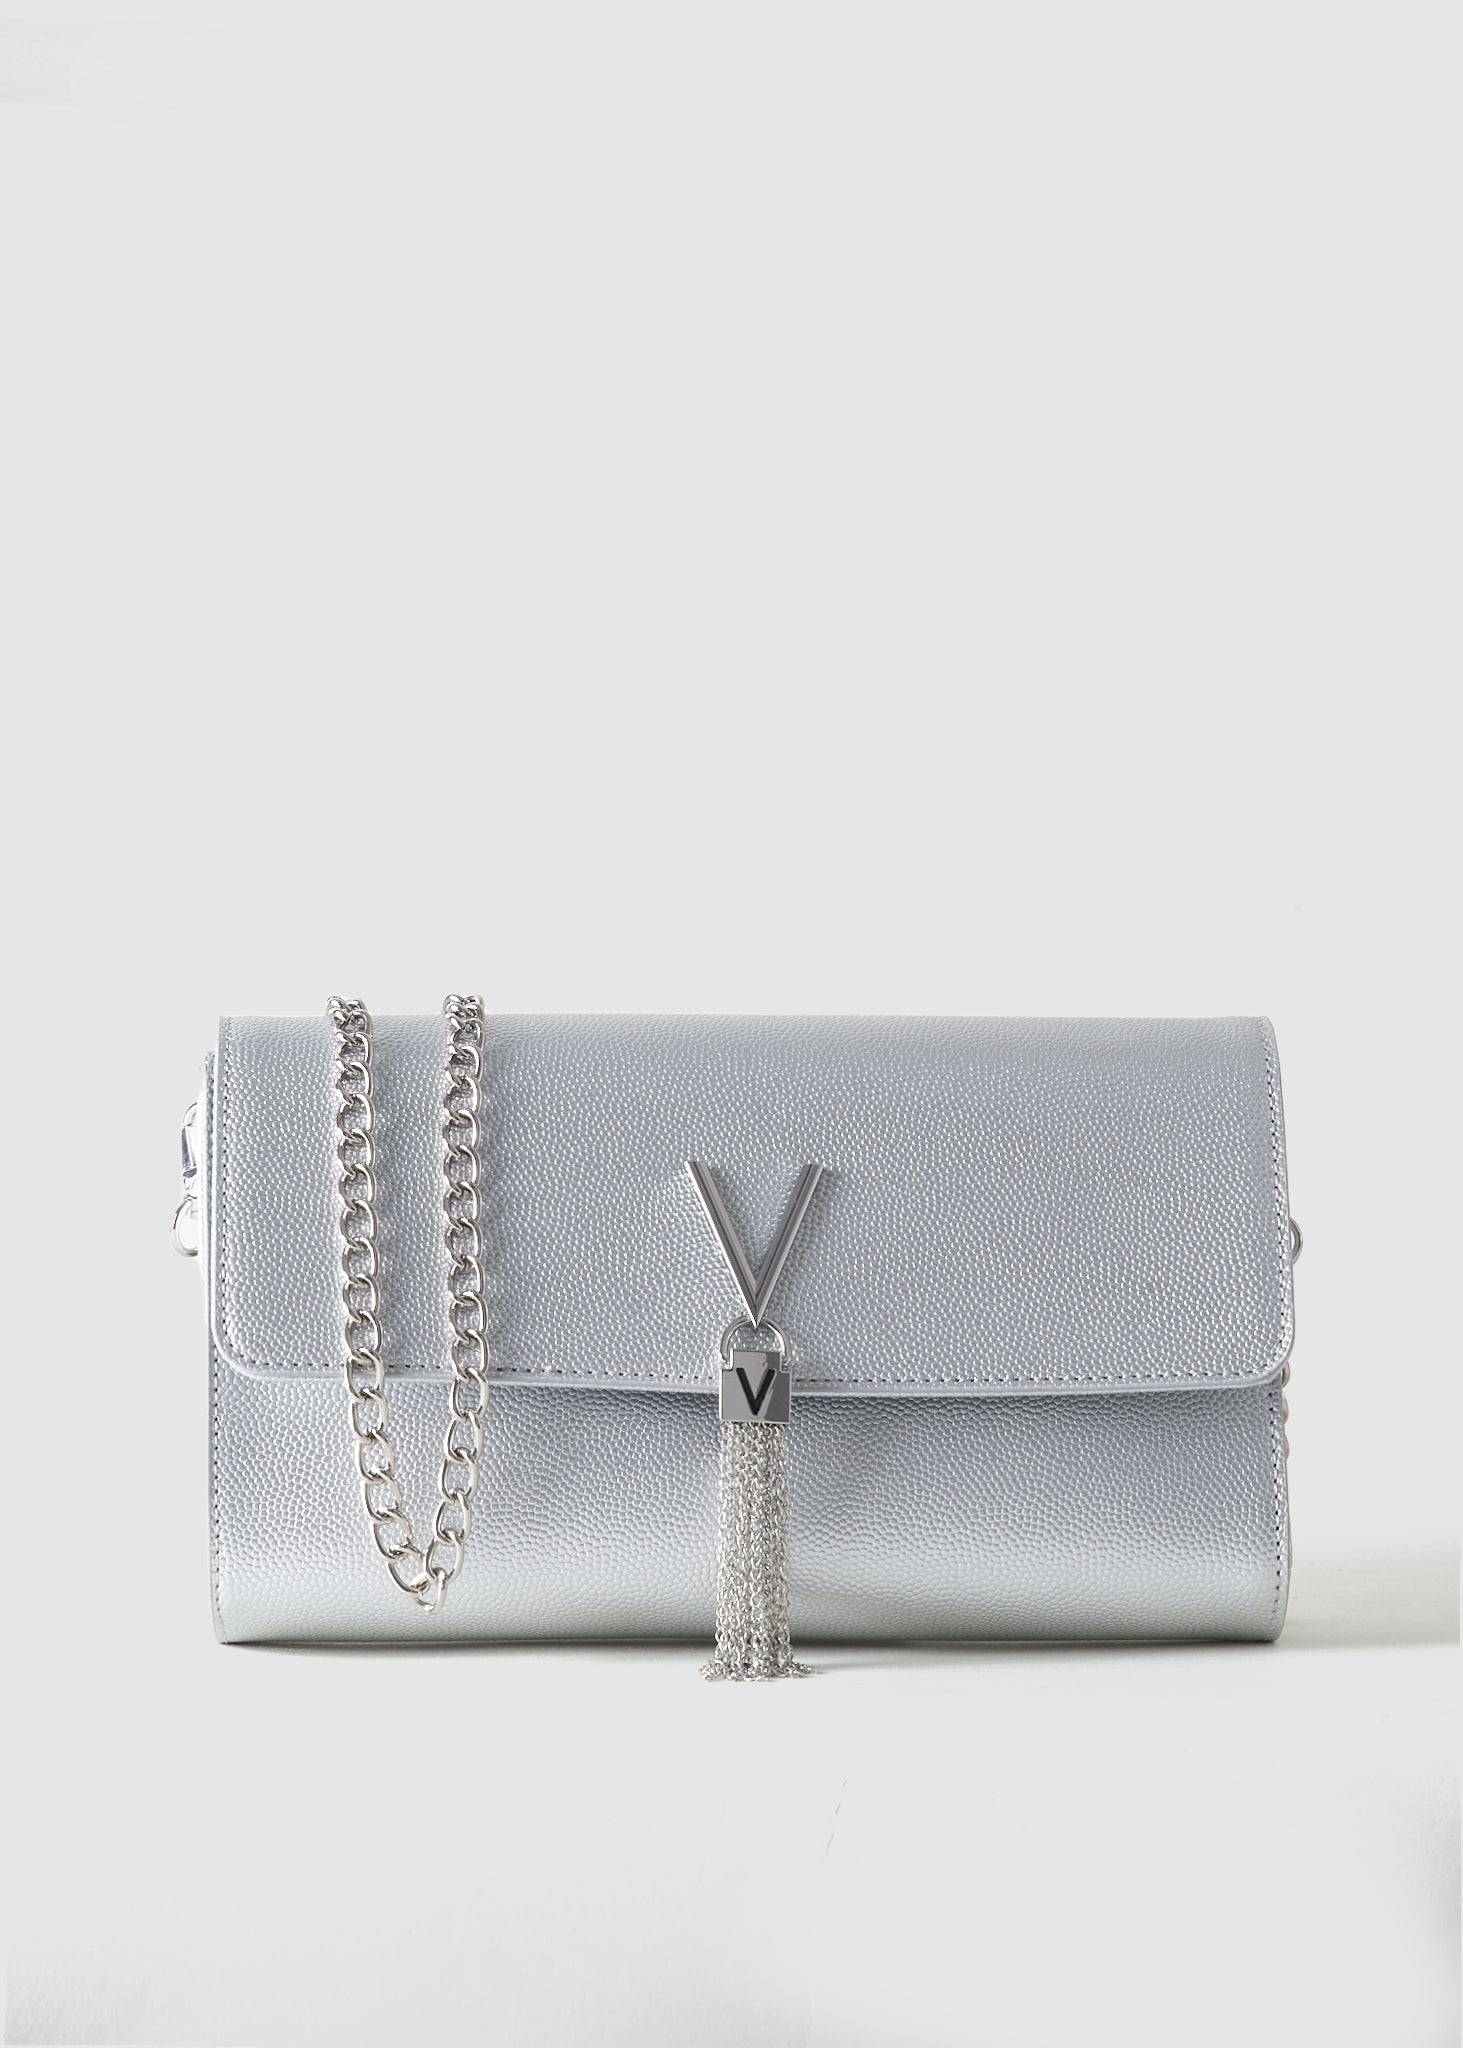 Image of Valentino Bags Womens Divina Fold Over Clutch Bag With Chain Strap In Argento